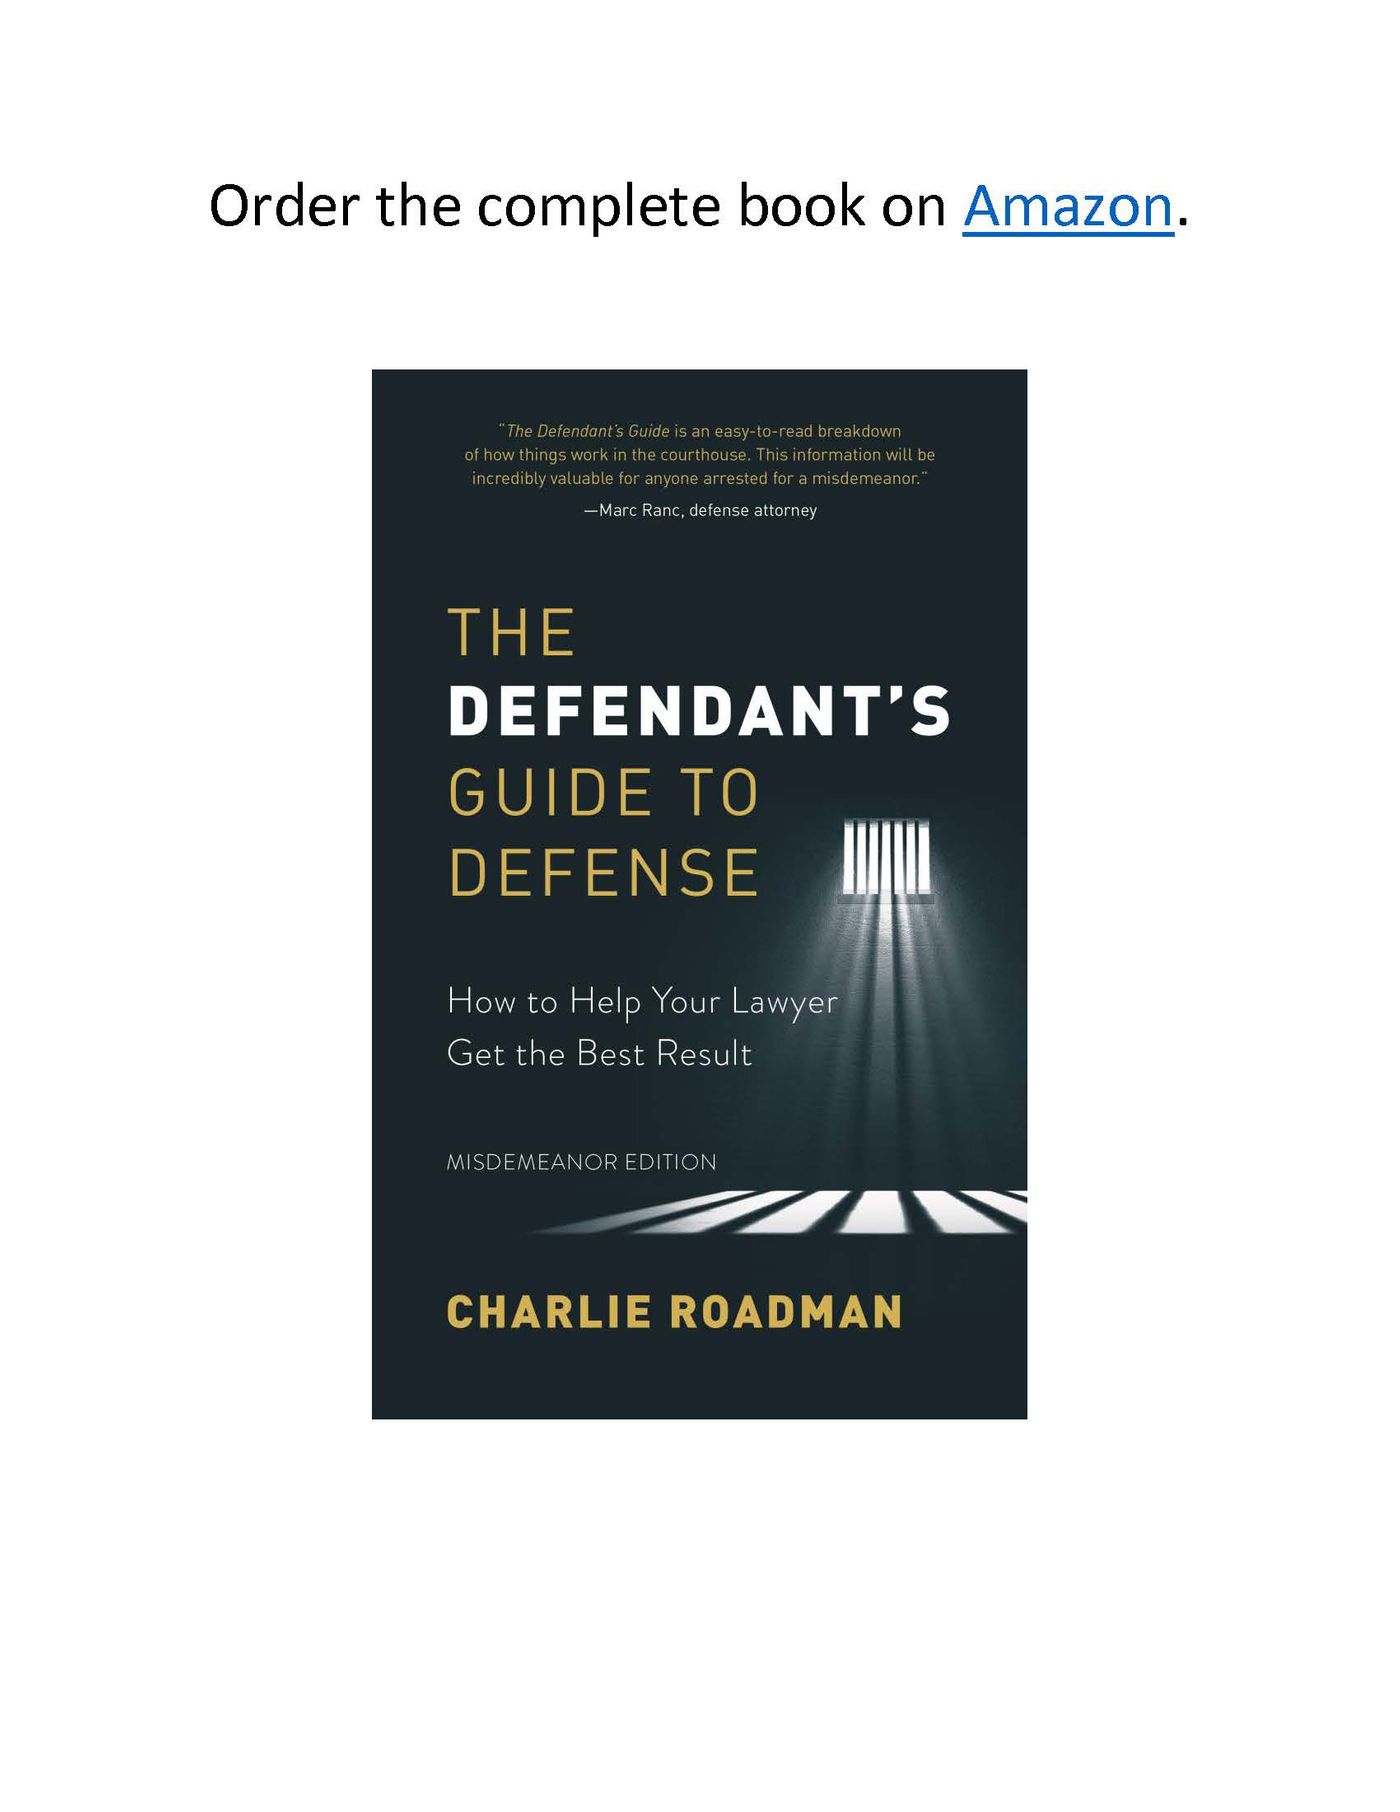 Sample_of_Defendant_s_Guide_to_Defense_Page_30.jpg